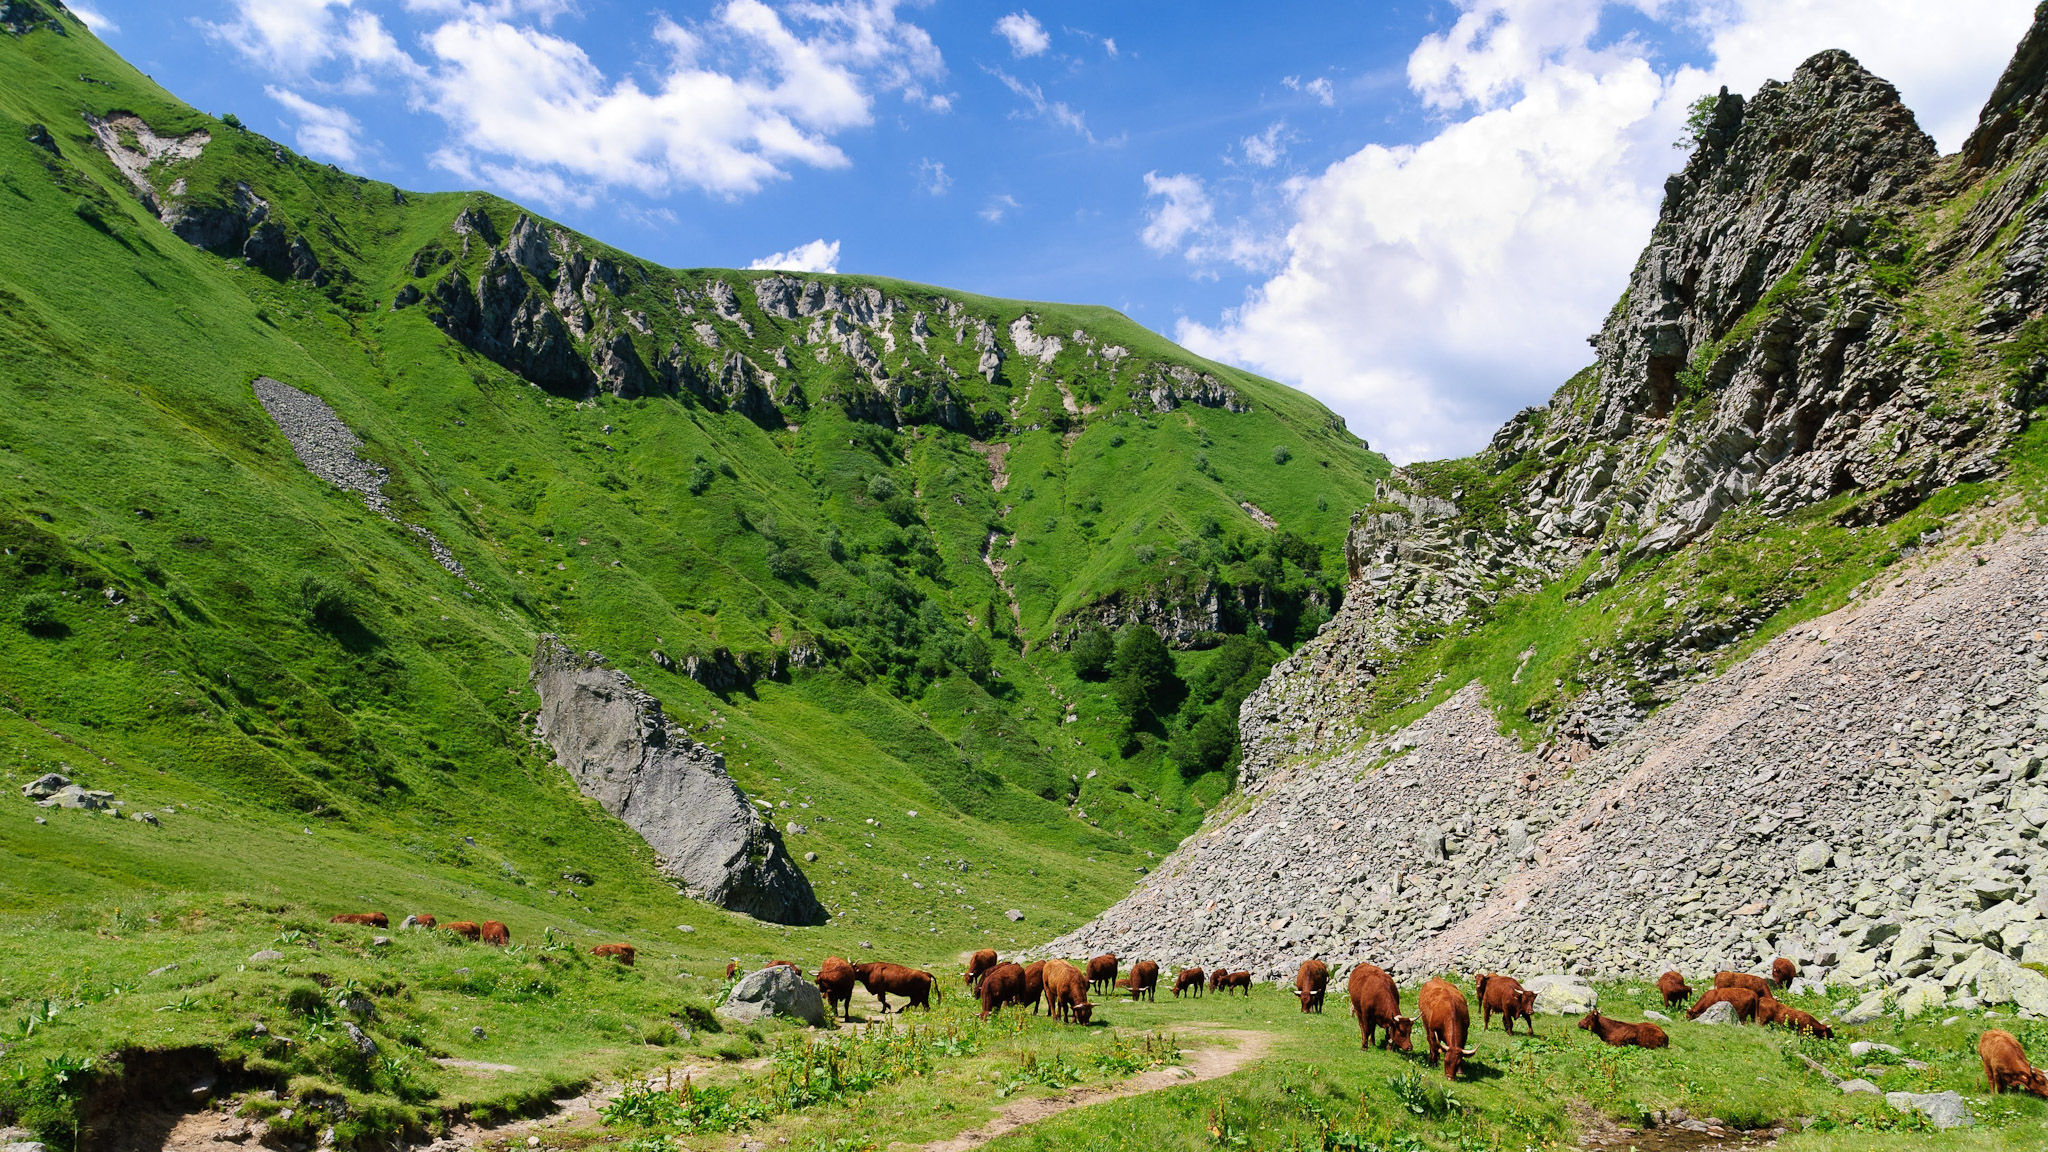 The Val de Courre and its cows in the mountain pastures of the Massif du Sancy in the heart of summer.